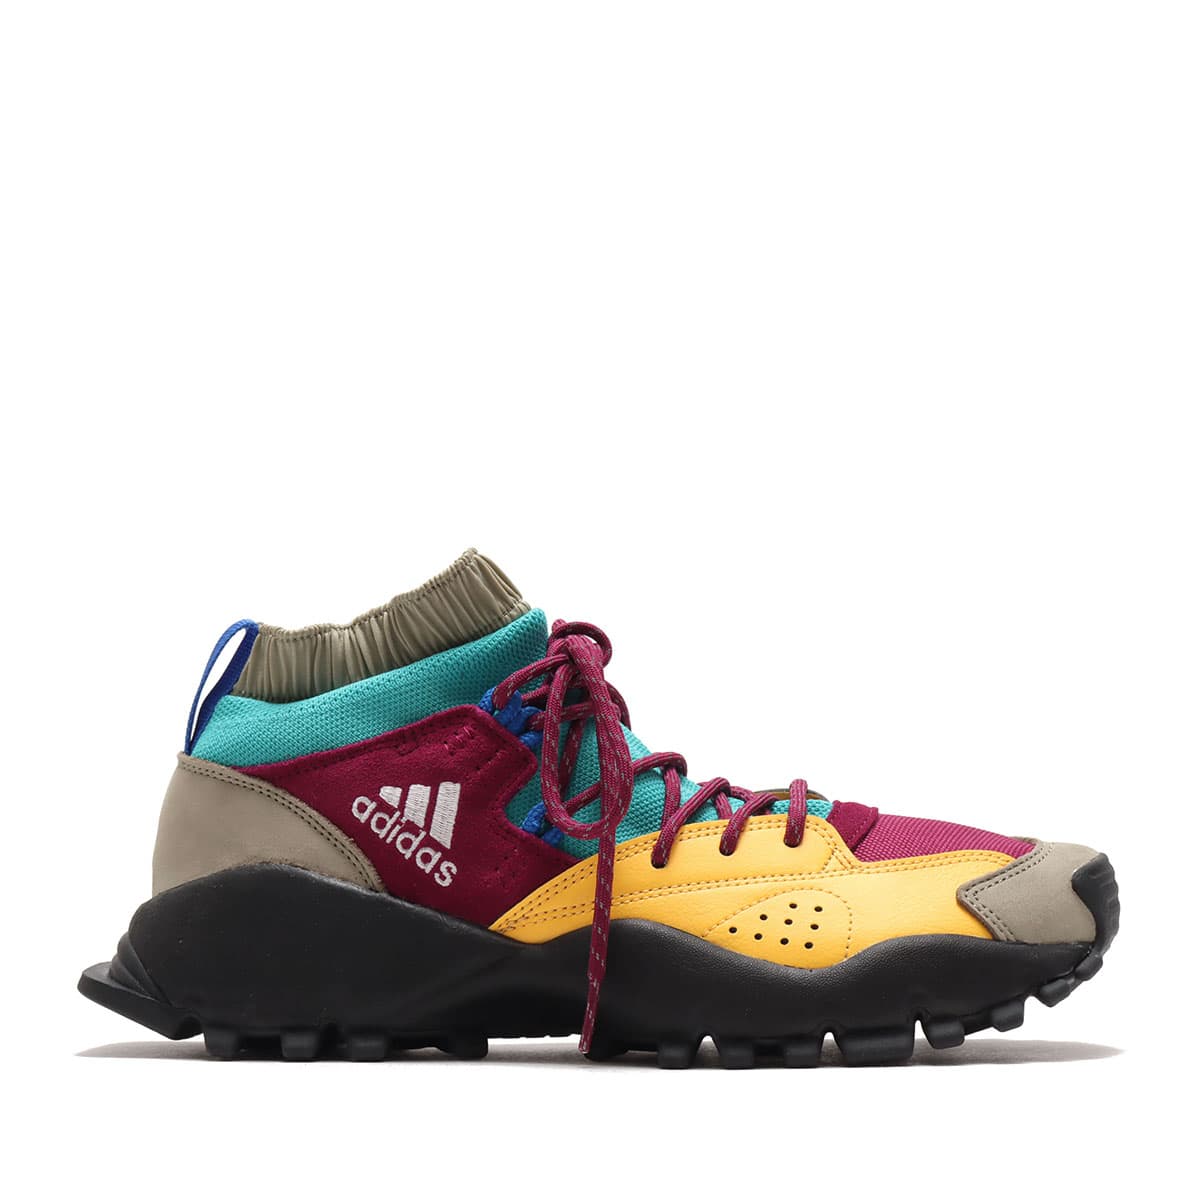 adidas SEEULATER OG CORE BLACK/POWER BERRY/SOLAR GOLD 20FW-S